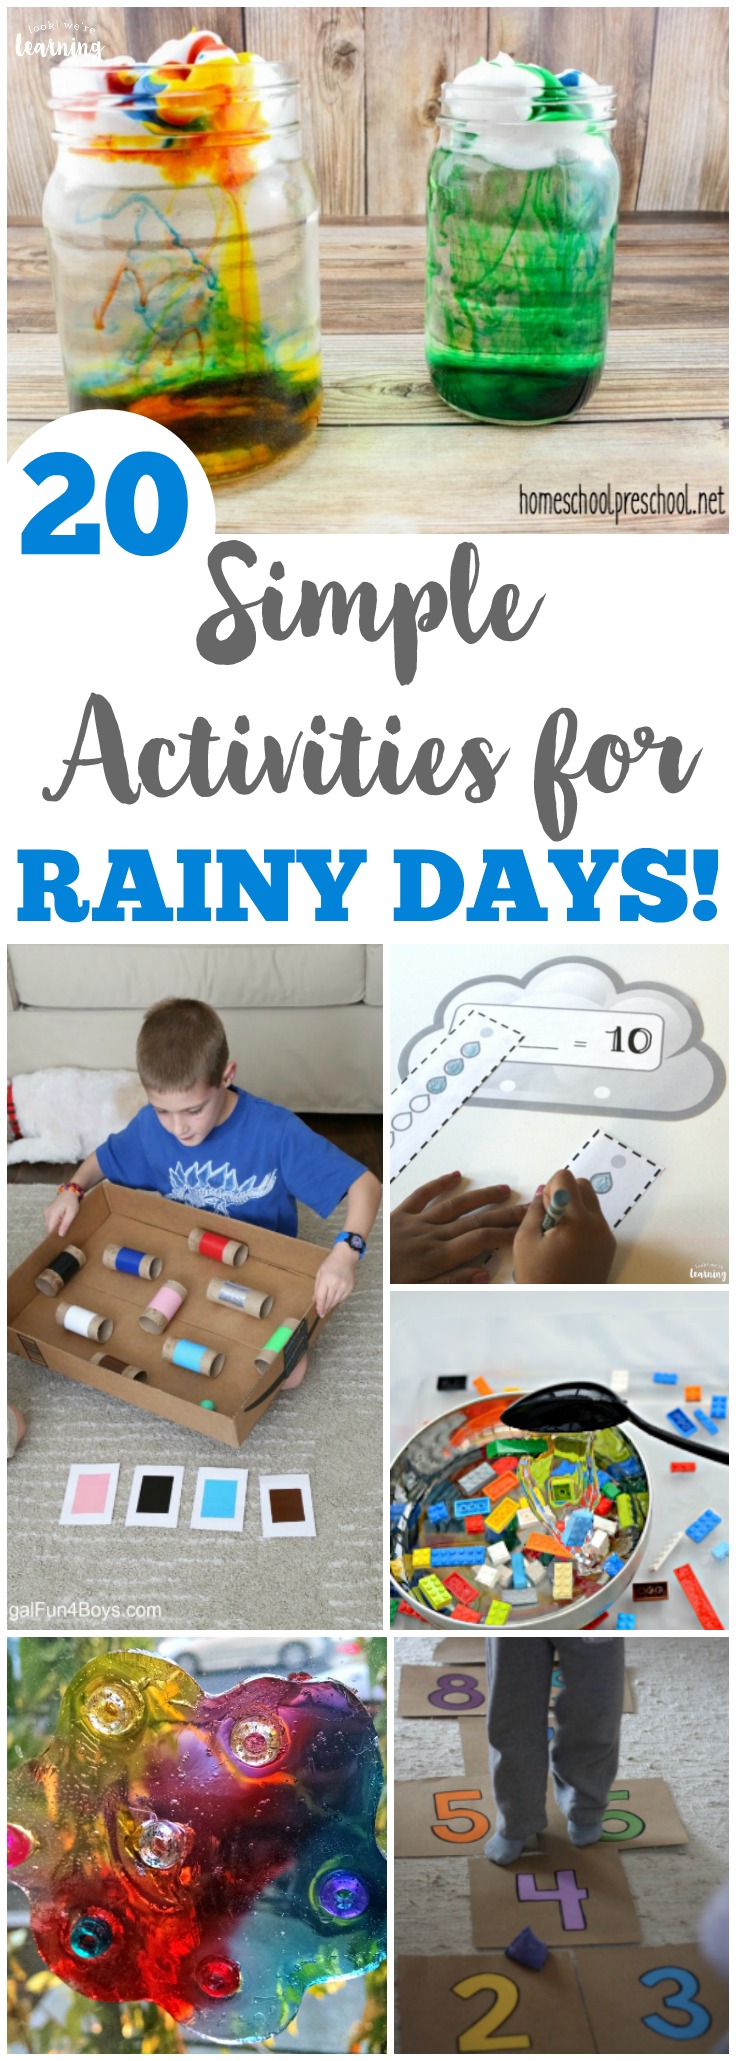 Make a rainy day into a fun learning event with these simple rainy day activities for kids!